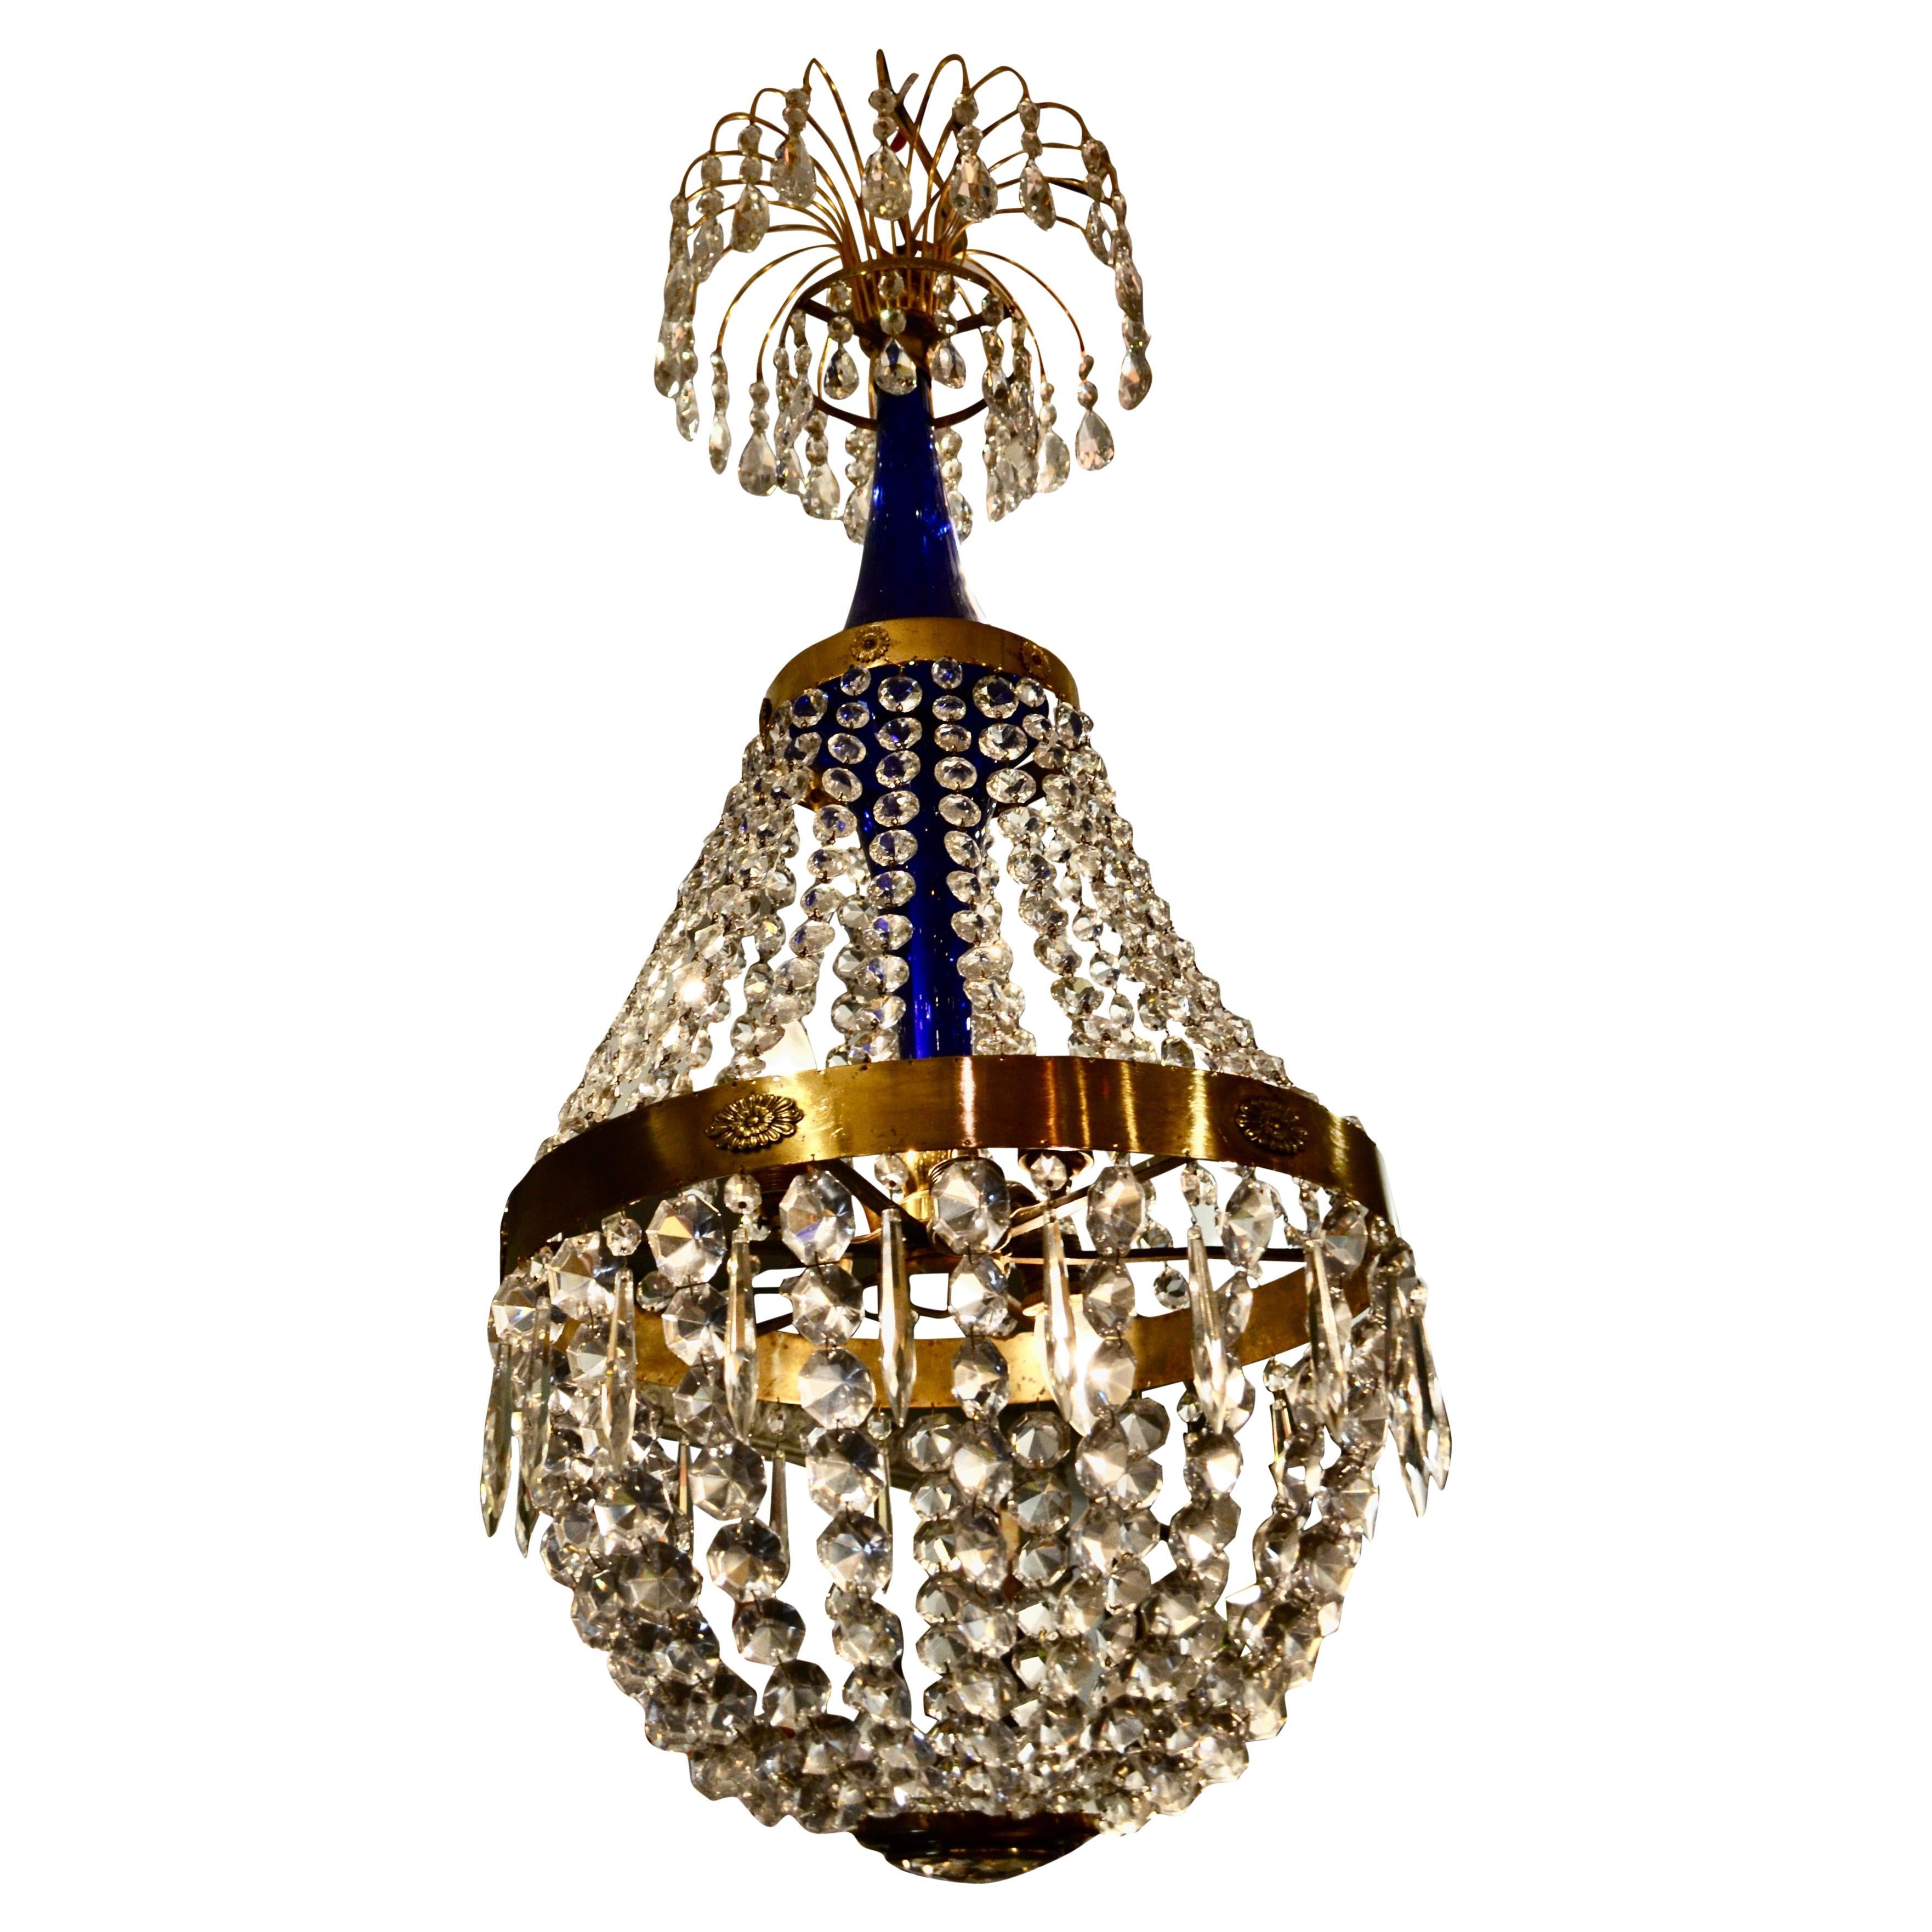 The chandelier embodies some of the best design features of early 19th century Russian/Baltic chandeliers, featuring cobalt blue glass around the central stem; a top spray of curved gilded rods terminating in almond and round shaped cut crystals; a